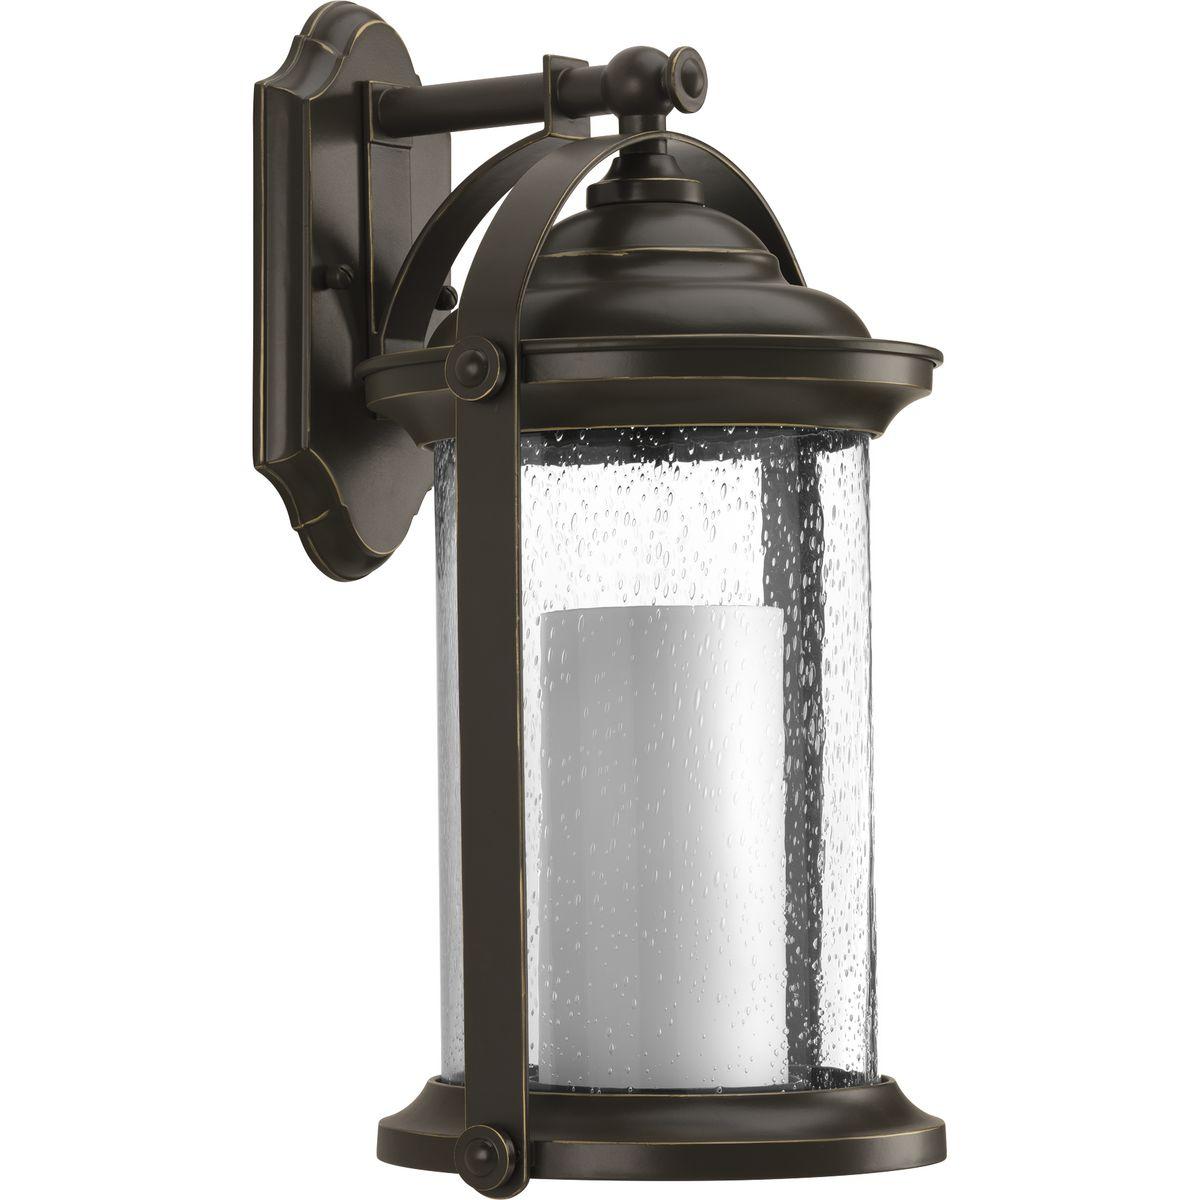 Hubbell P560069-020-30 Inspired by traditional lantern styles, Whitacre medium wall lantern incorporates handsome details. Clear seeded glass surrounds an etched opal glass candle diffuser. An Antique Bronze finish complements a variety of exteriors, including Transitional and 